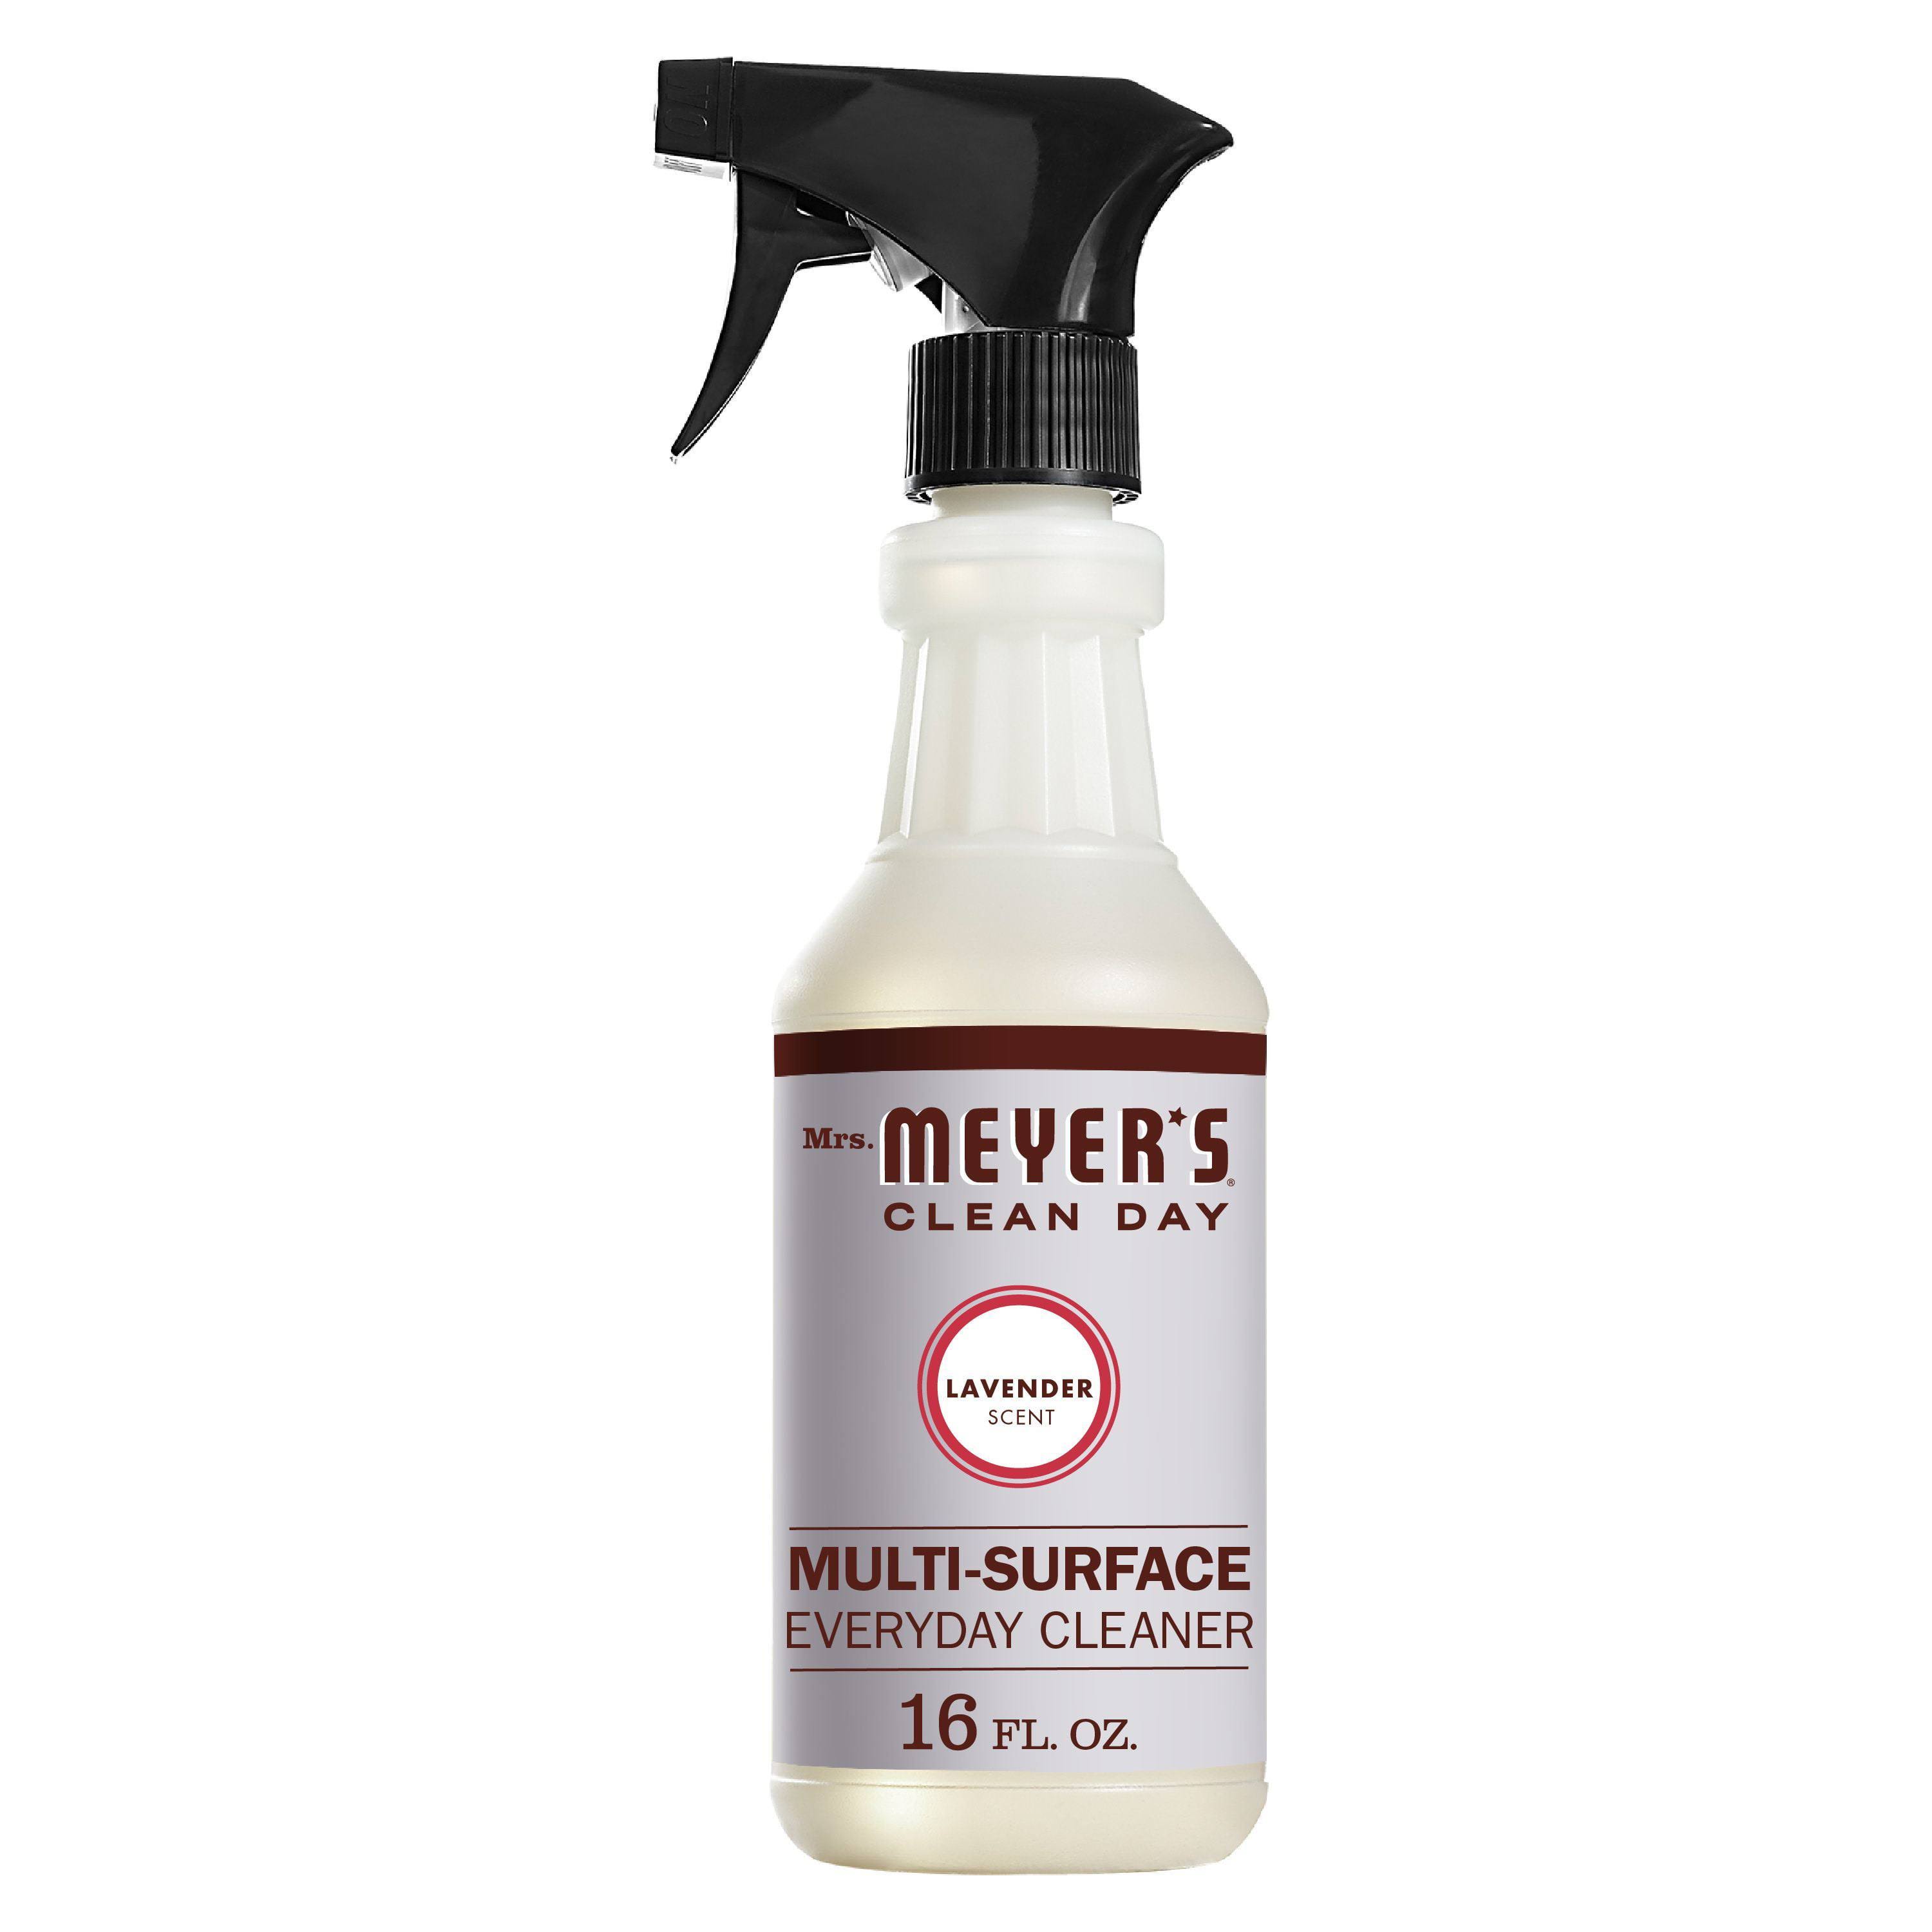 Mrs. Meyer's Clean Day Multi-Surface Everyday Cleaner - Lavender